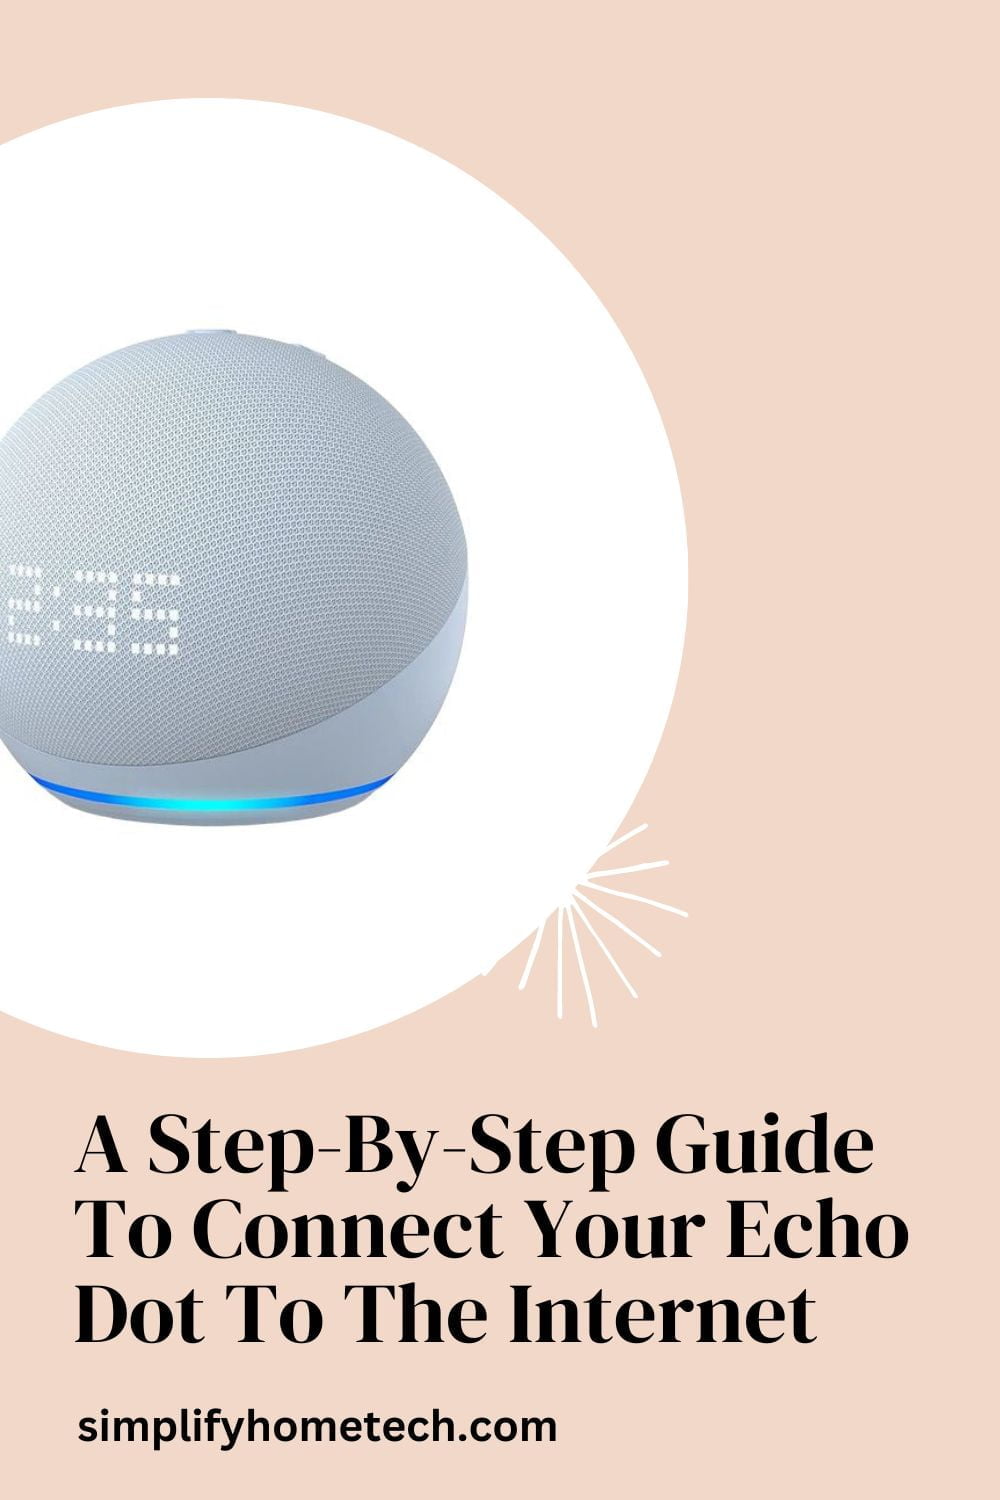 A Step-By-Step Guide to Connect Your Echo Dot to the Internet